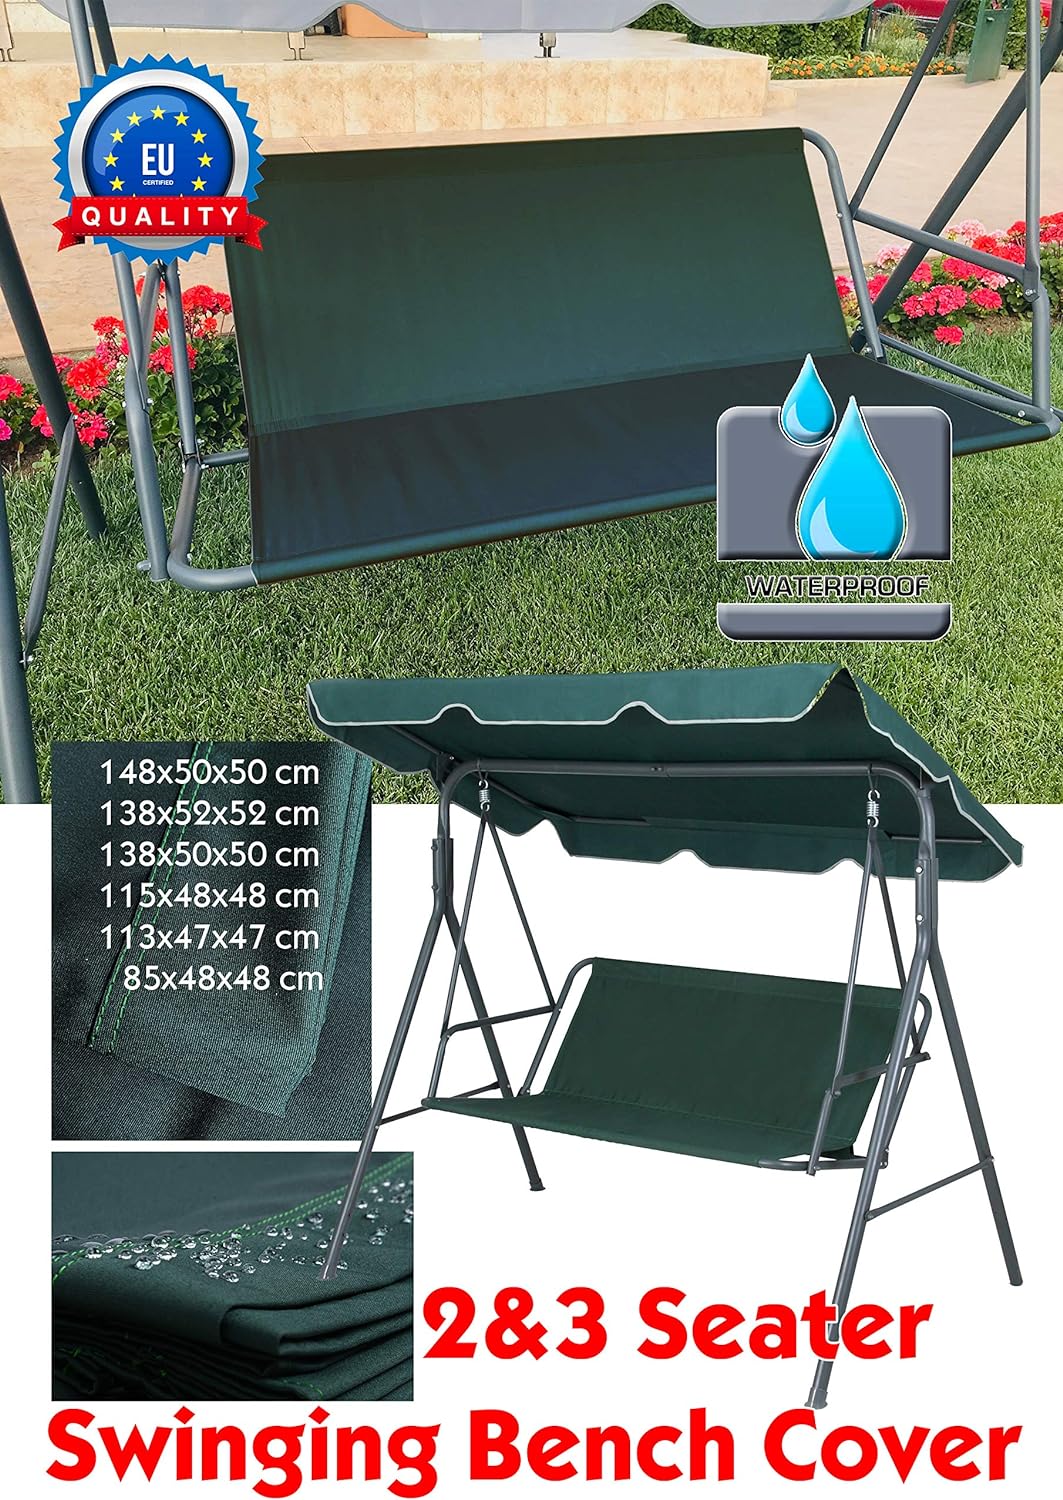 Replacement Swing Seat Cover | Waterproof | UV Resistant